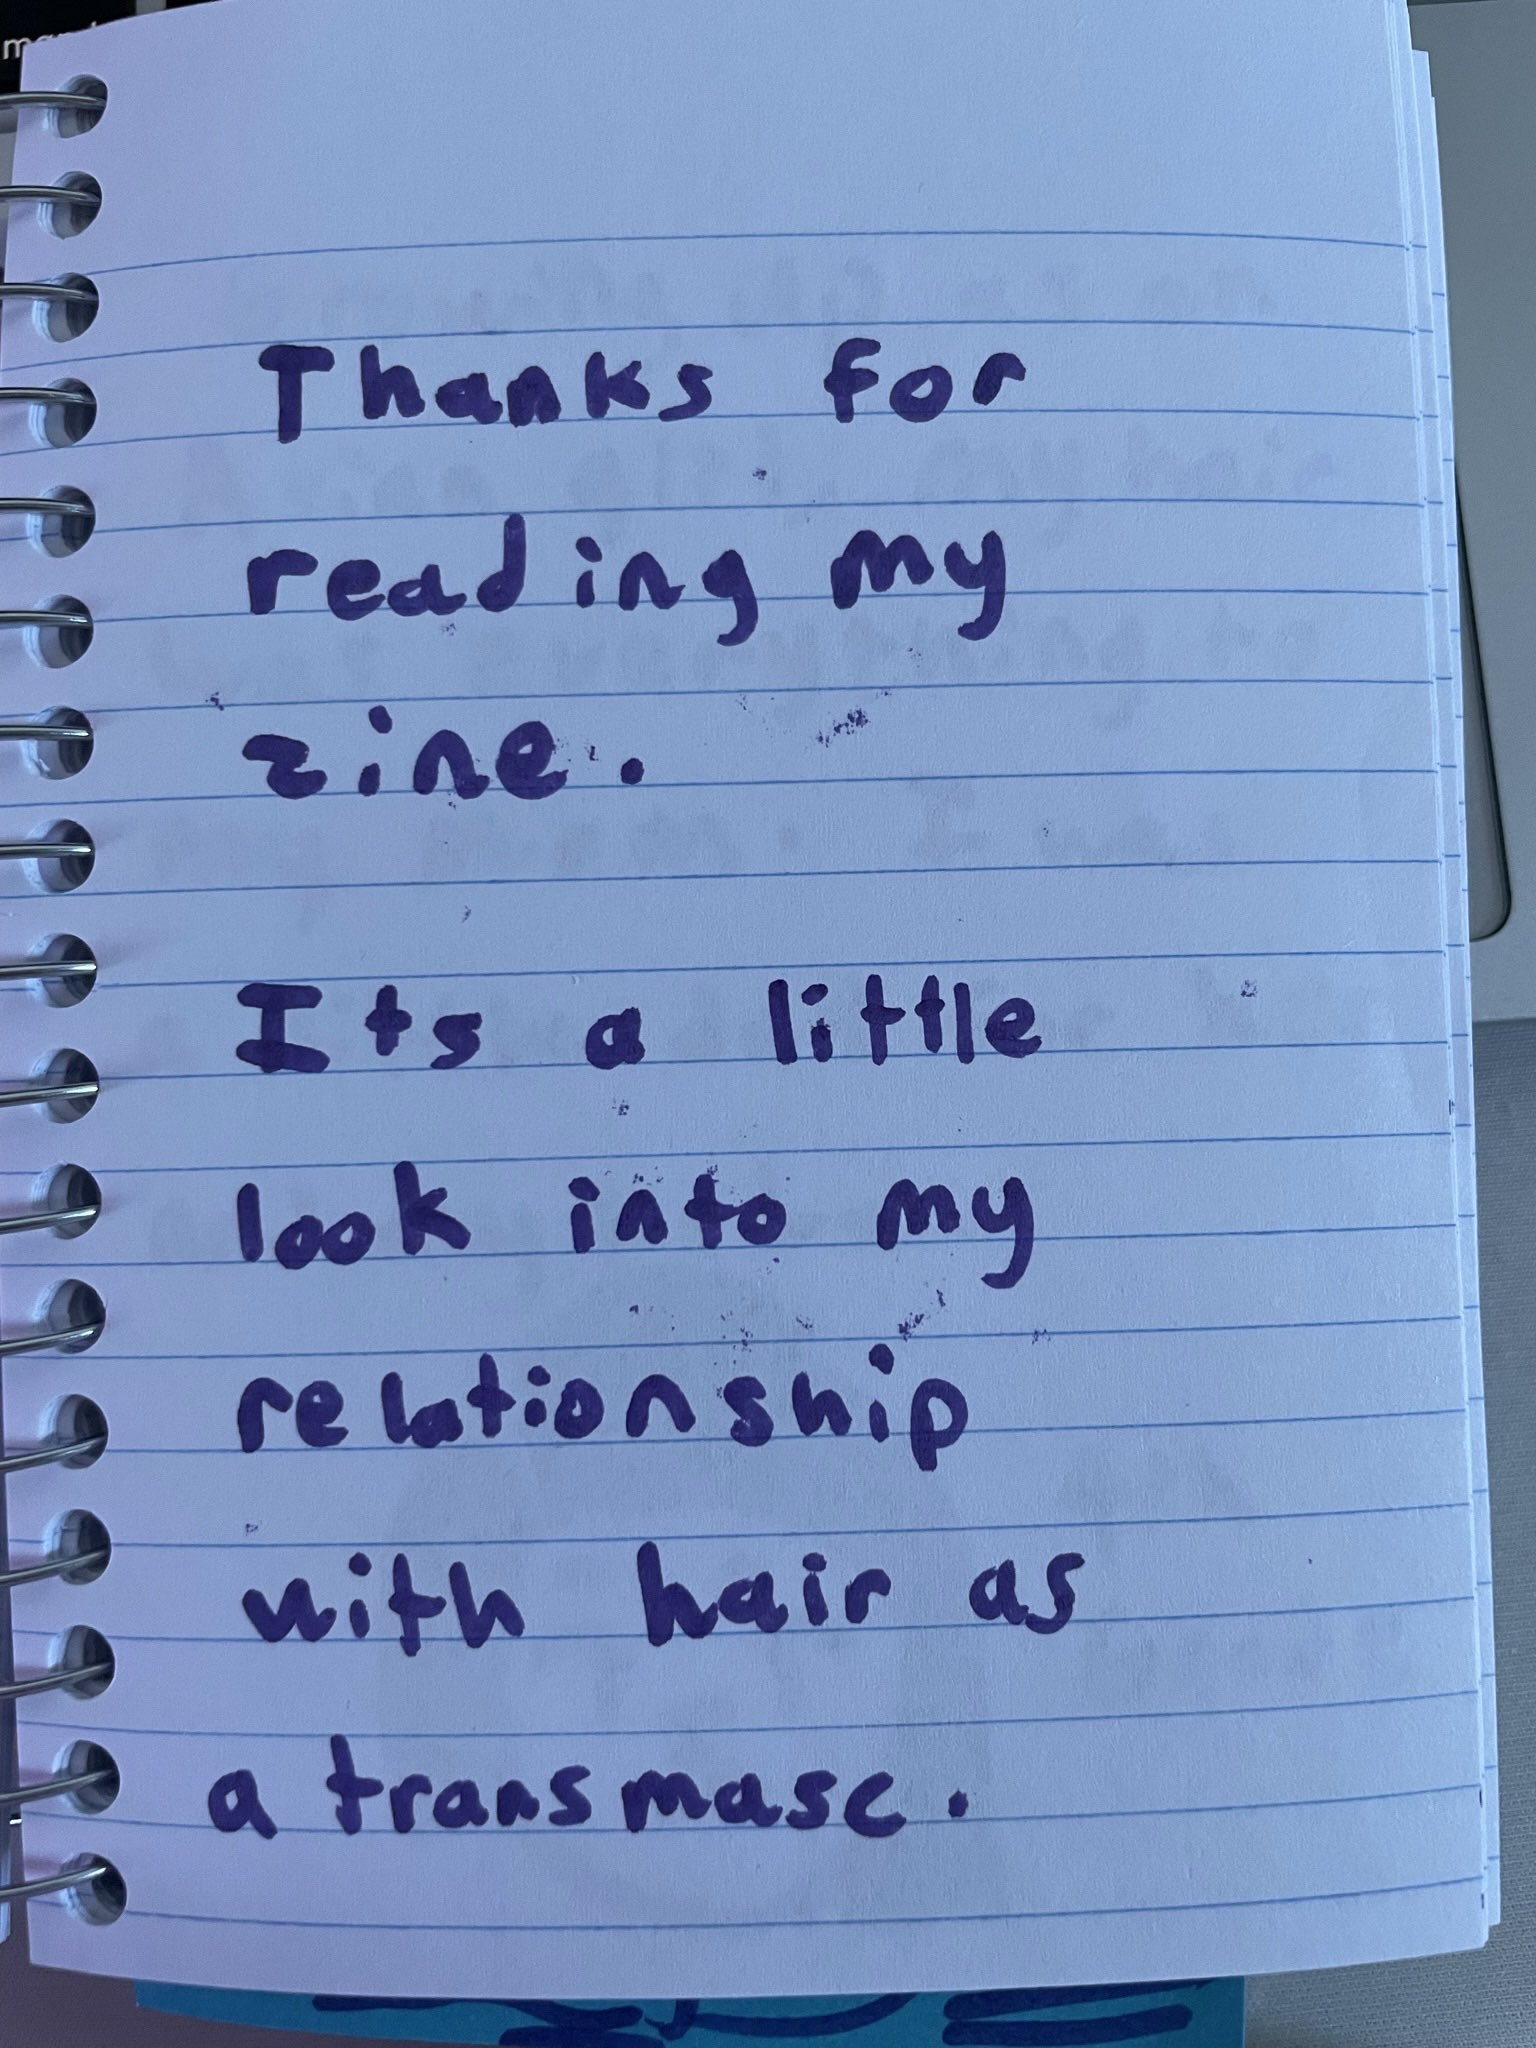 thanks for reading my zine, its a little look into my relationship with hair as a transmasculine person.